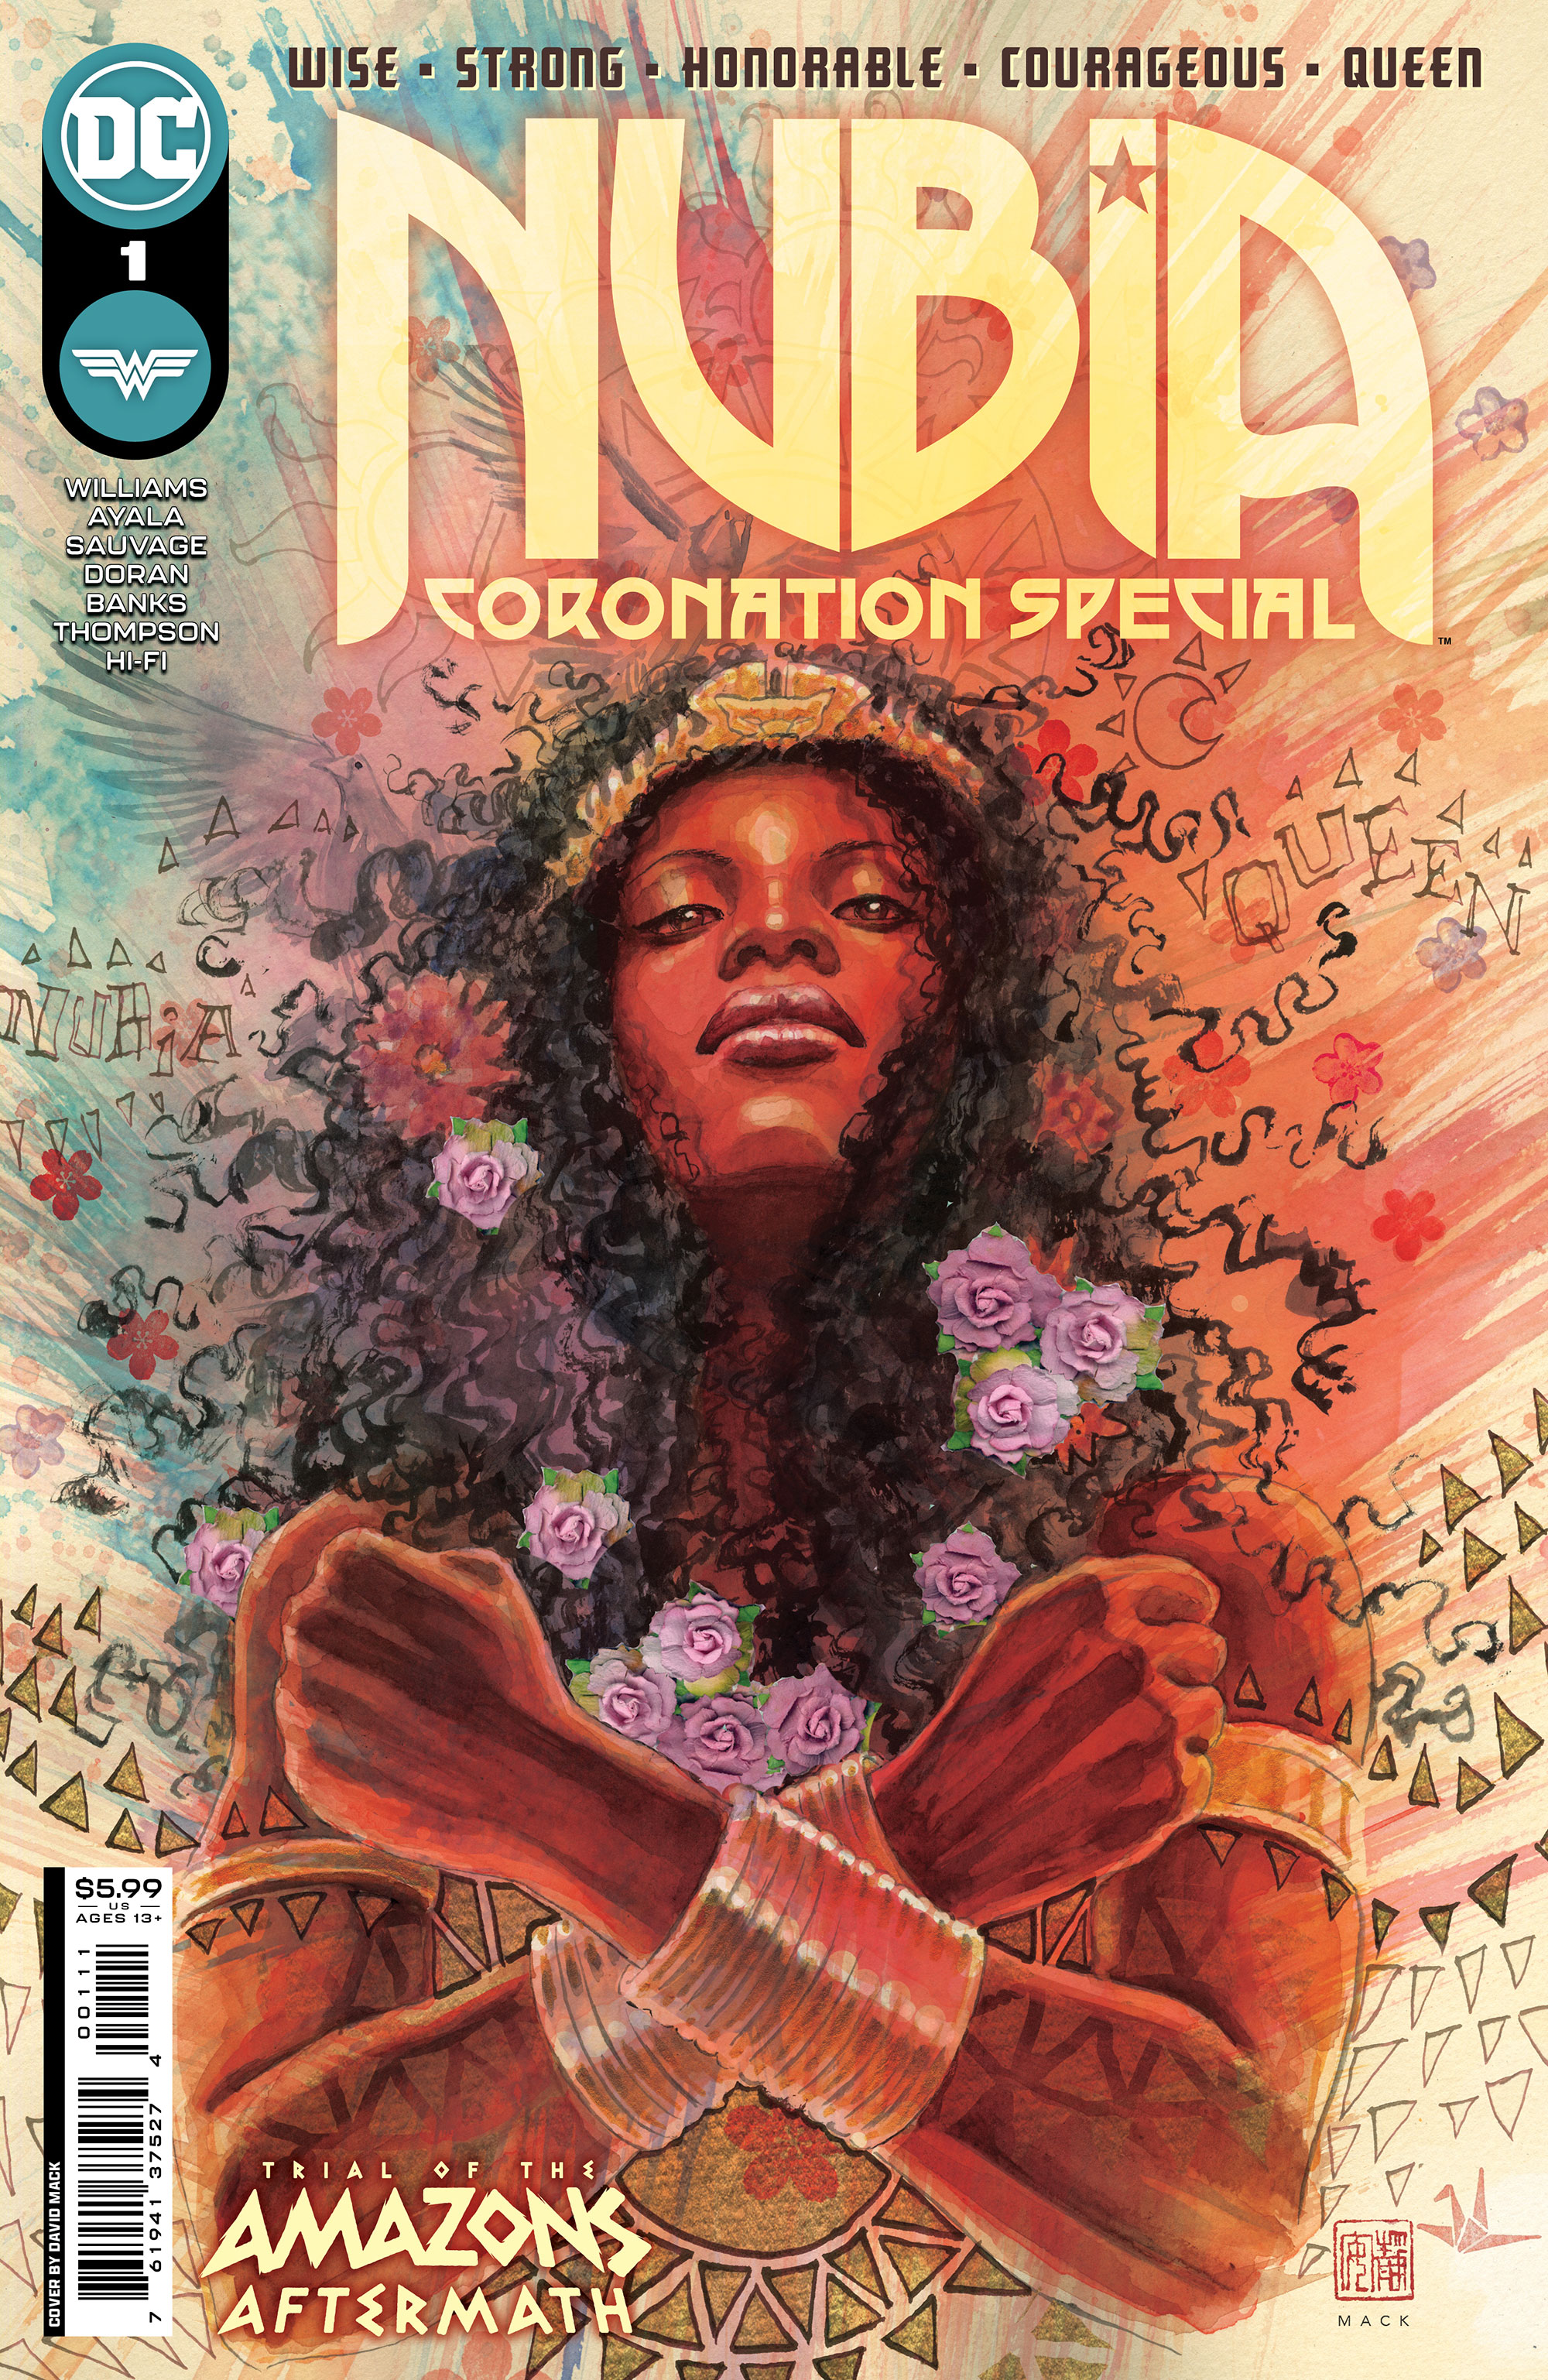 Nubia Coronation Special #1 (One Shot) Cover A David Mack